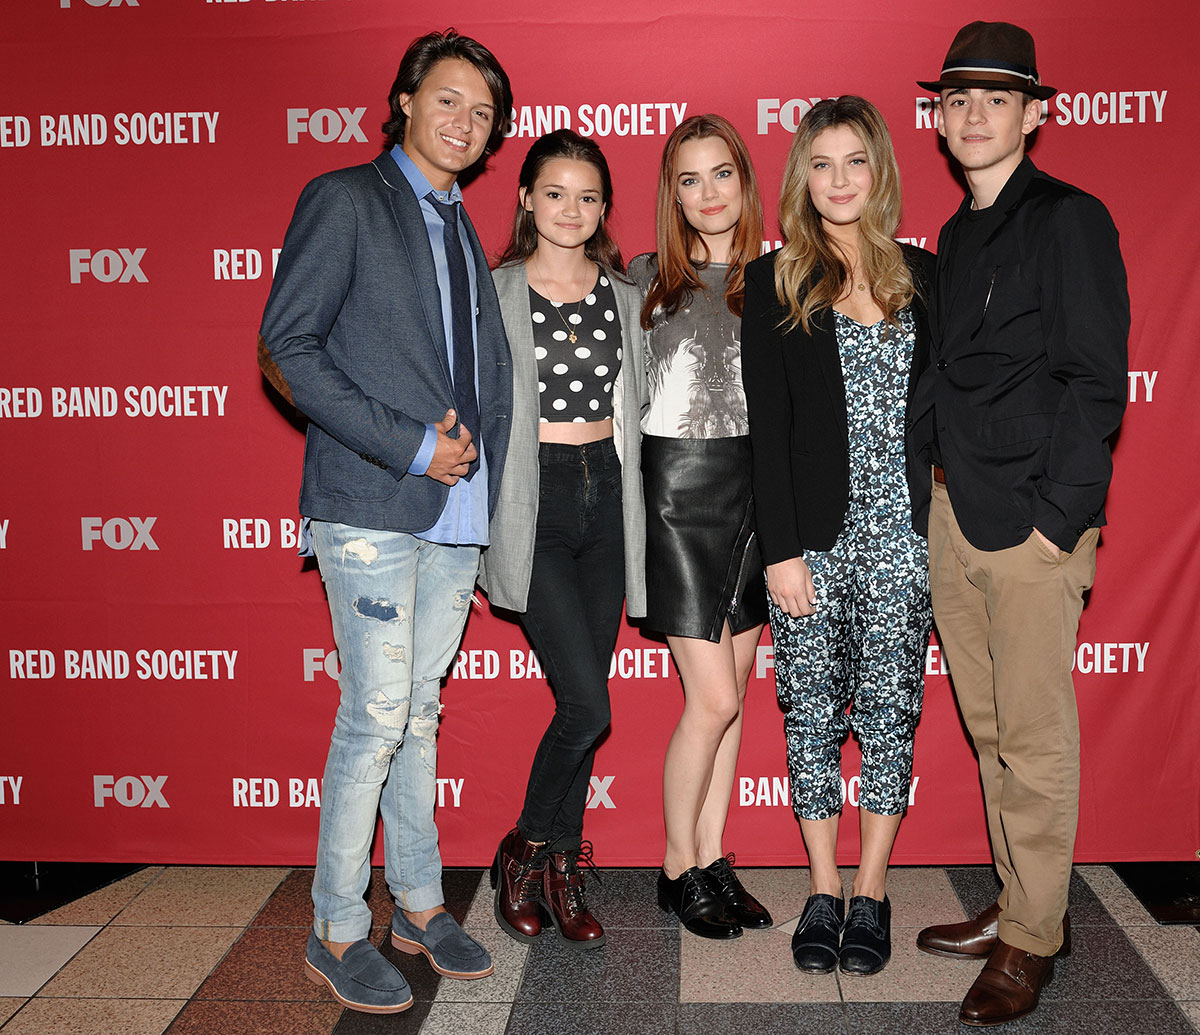 Rebecca Rittenhouse attends the Red Band Society screening